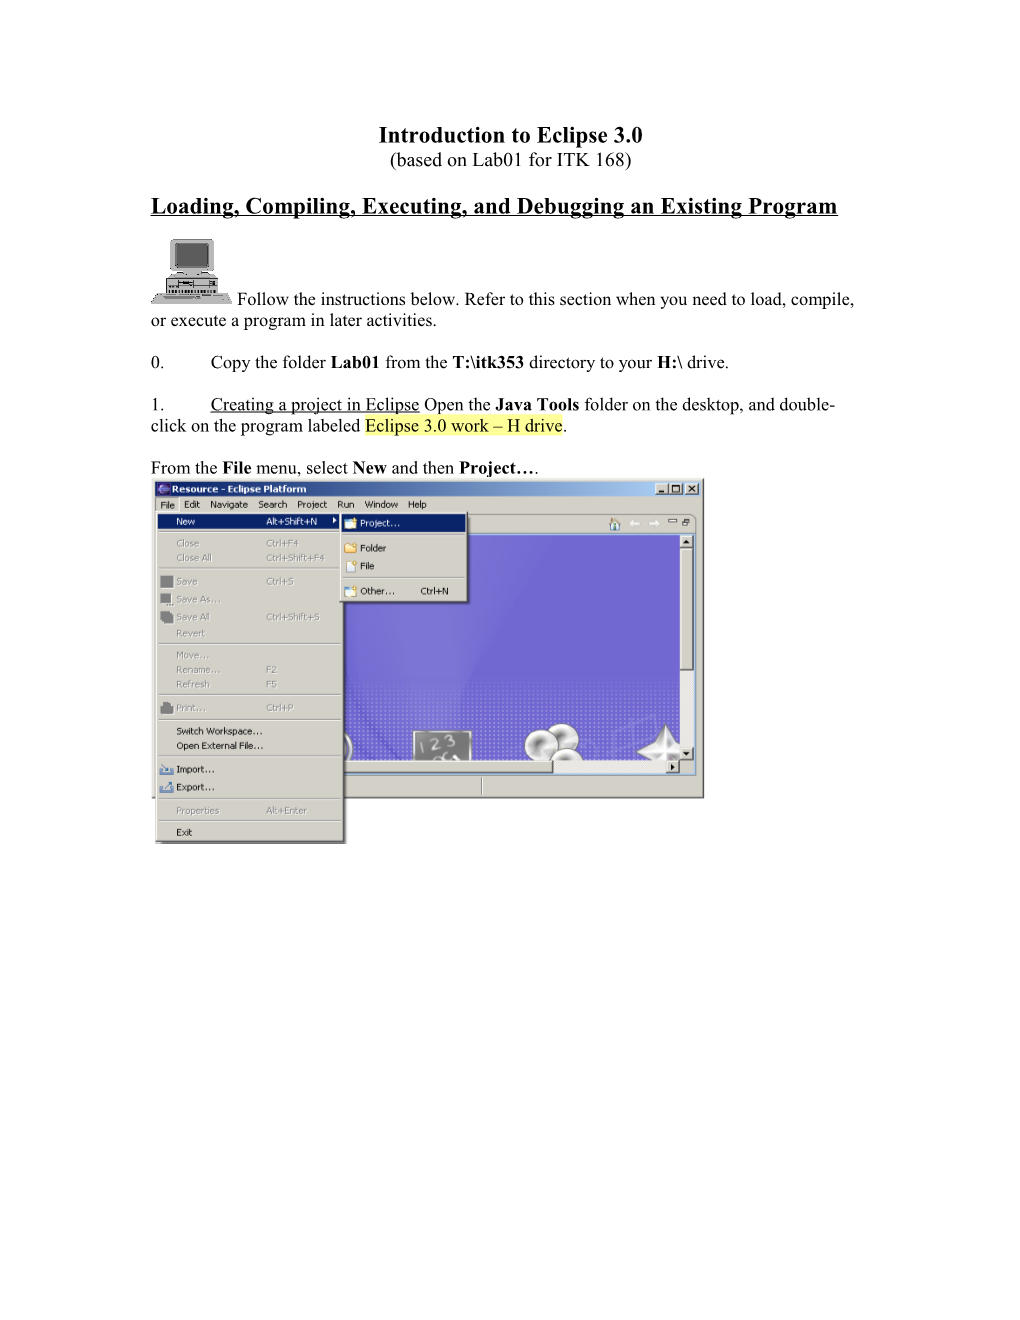 Loading, Compiling, Executing, and Debugging an Existing Program